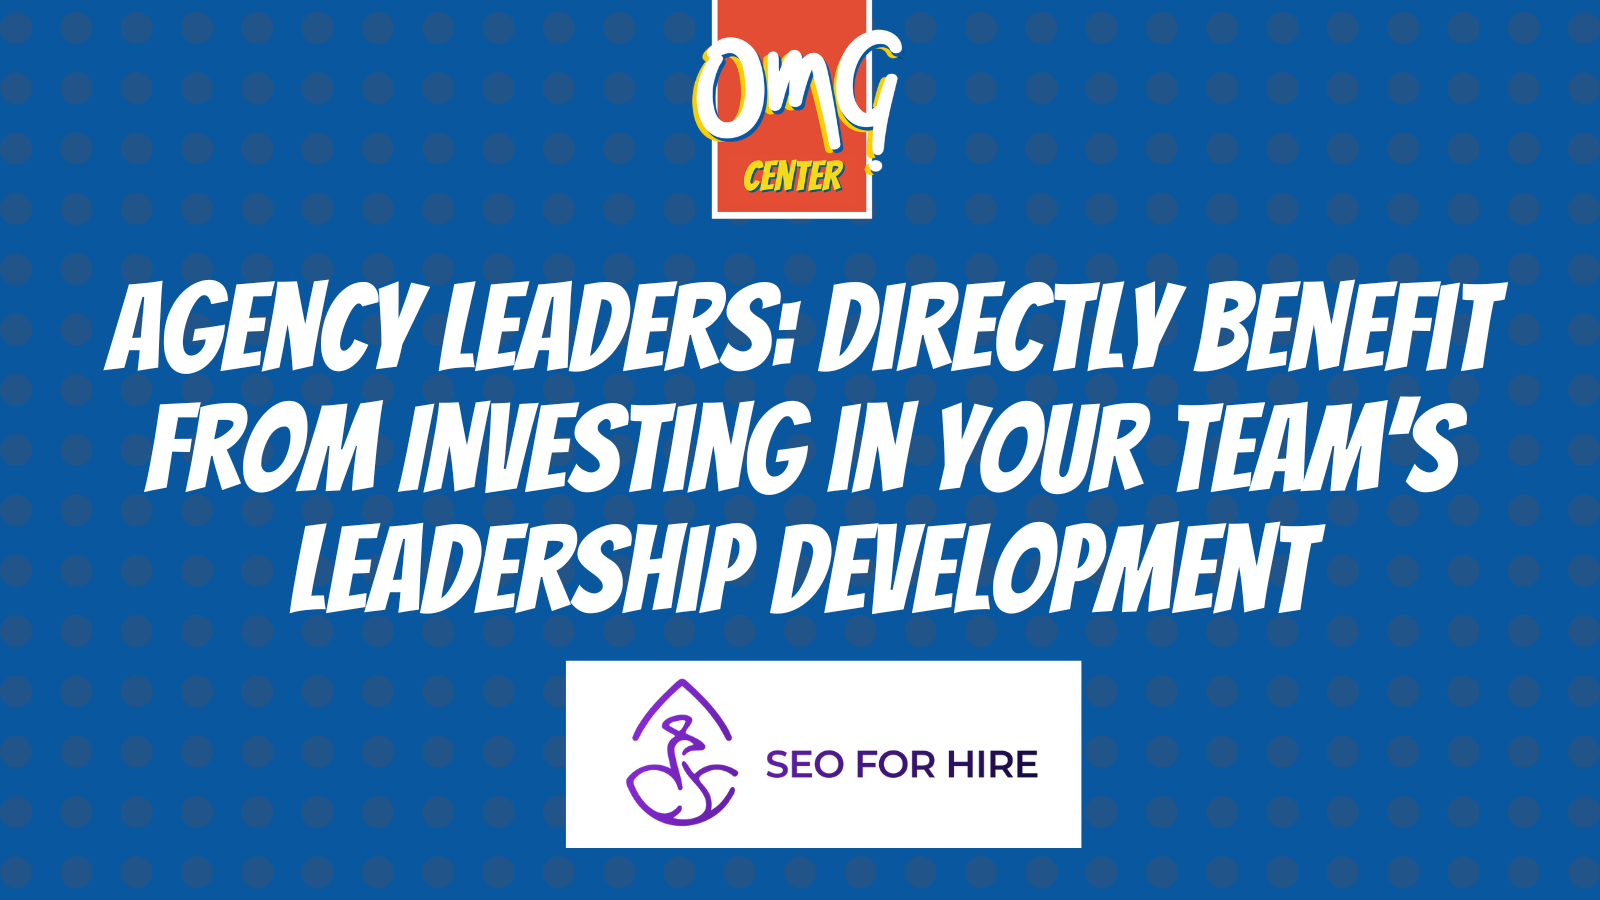 SEO for Hire - Agency Leaders Directly Benefit from Investing in Your Team’s Leadership Development  - Twitter